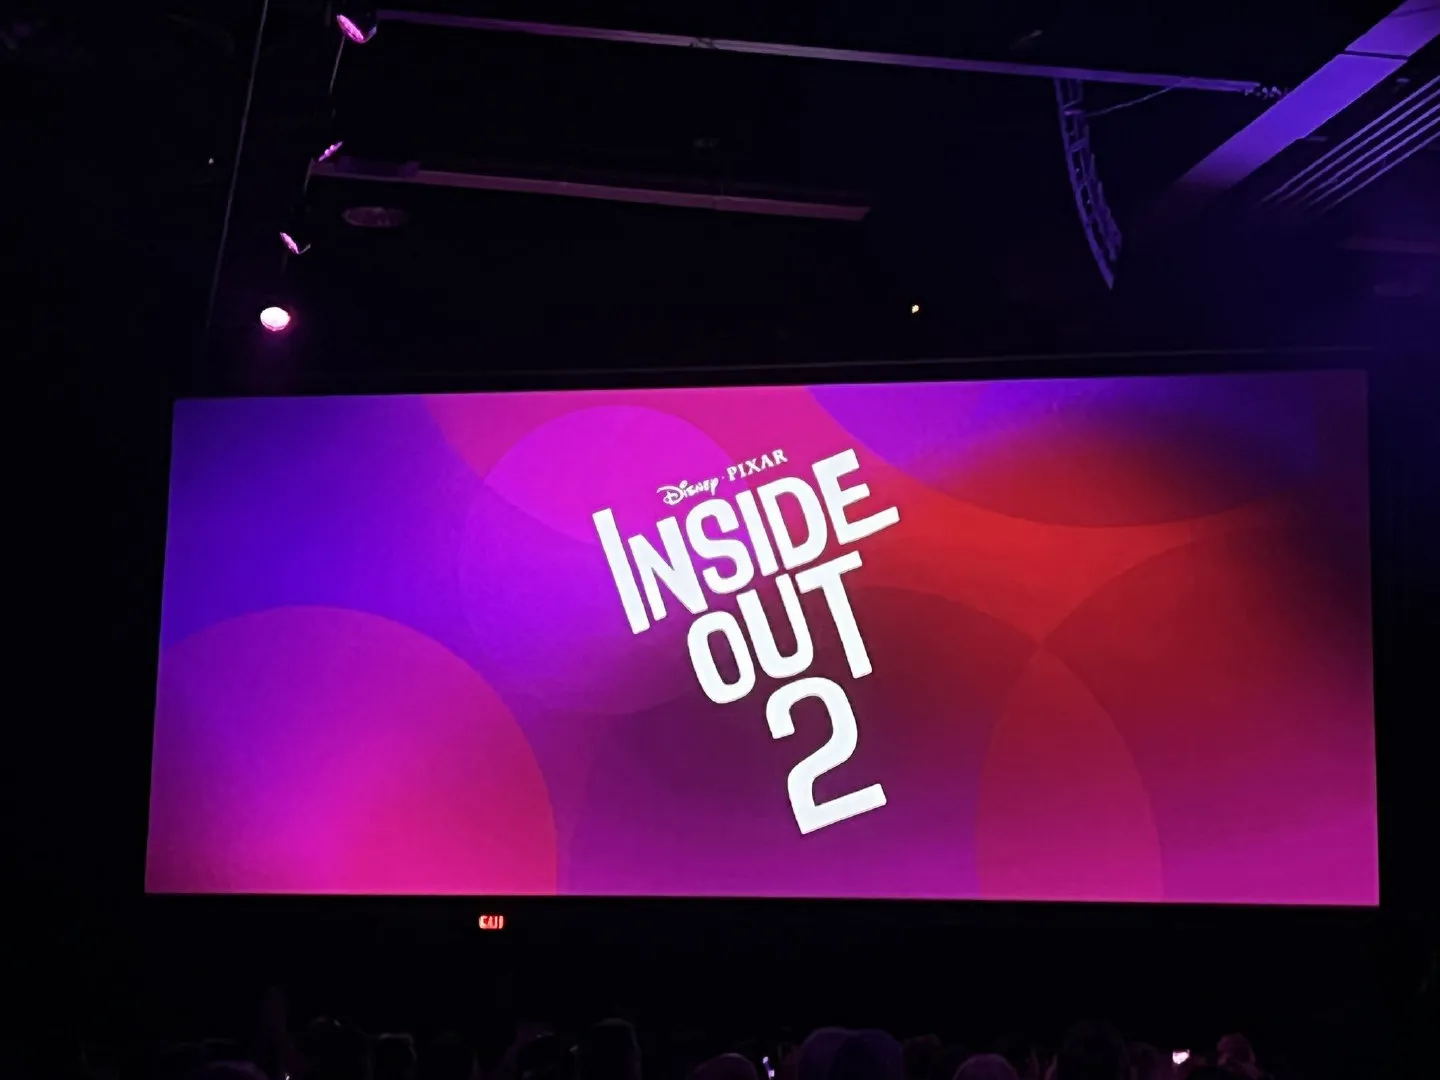 Pixar officially announces the production of 'Inside Out 2', and the logo is also exposed | FMV6